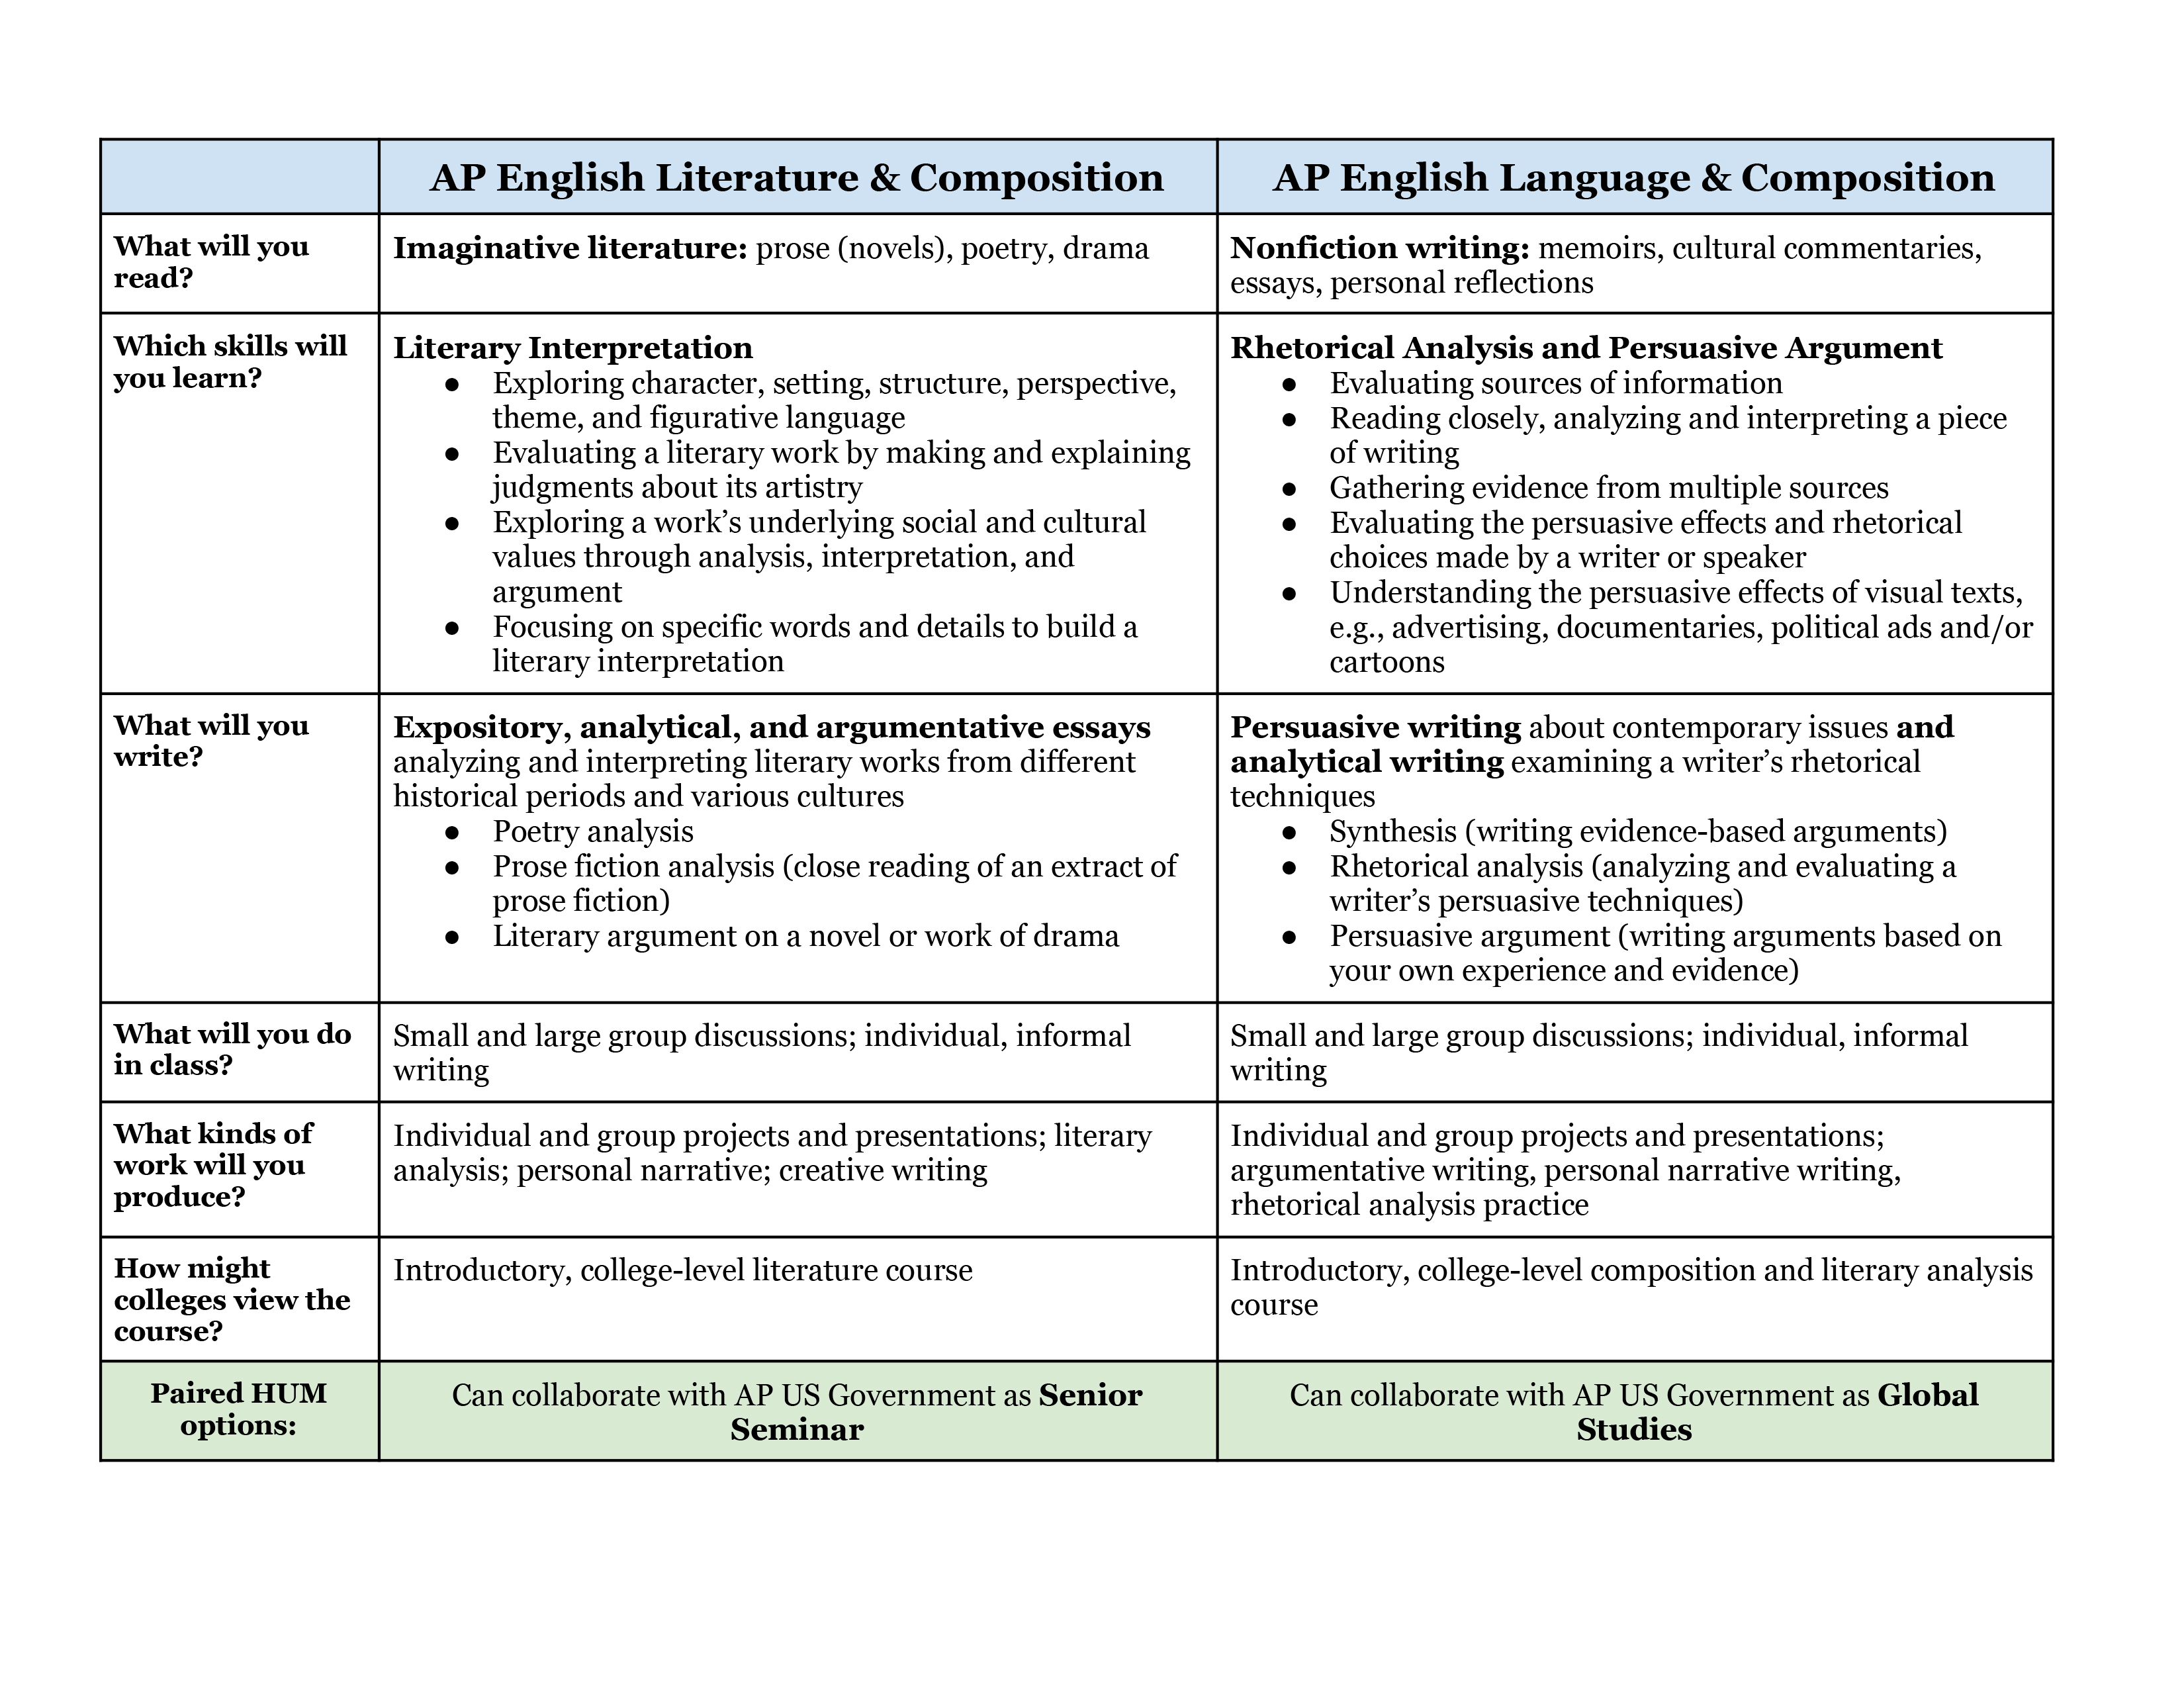 chart comparing differences between two courses. Information is typed out below for ADA purposes.